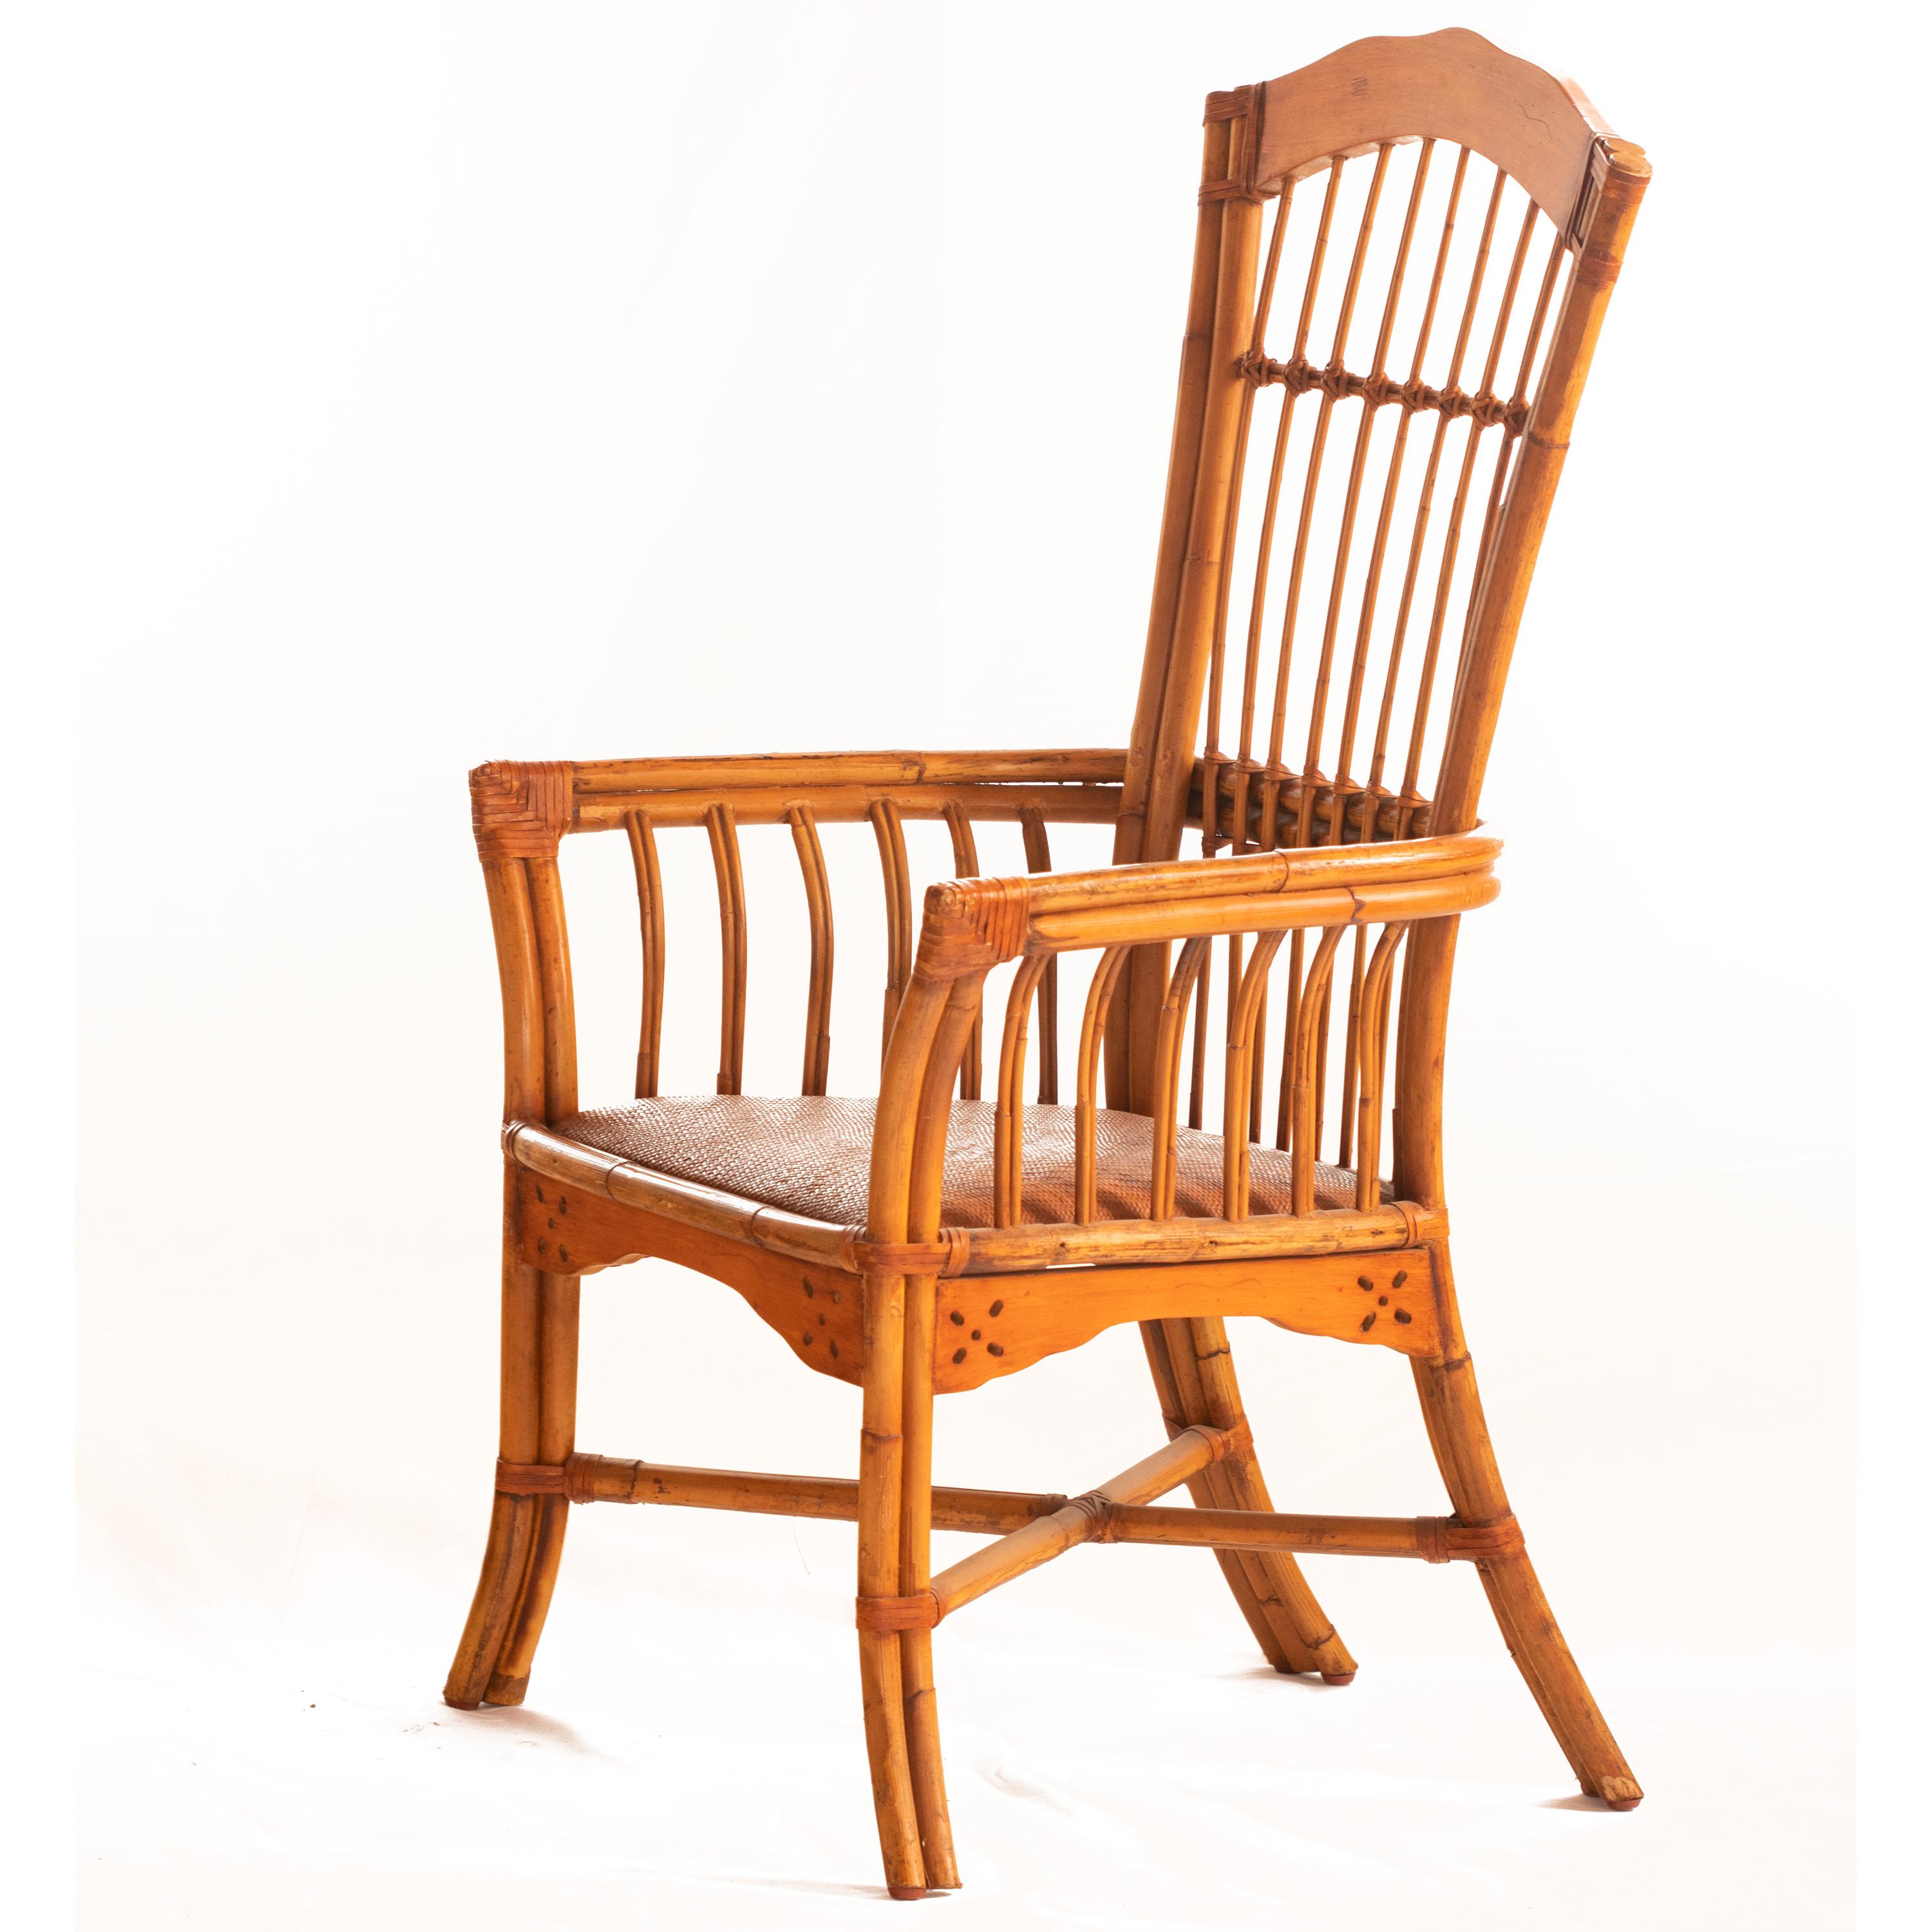 Armchair in rattan, seat upholstered in woven cane, backrest in woven leather. Light brown.

High quality bamboo and rattan collection. Design armchairs of the 20th century. Bamboo wood furniture with wicker seats. Armchairs of particular